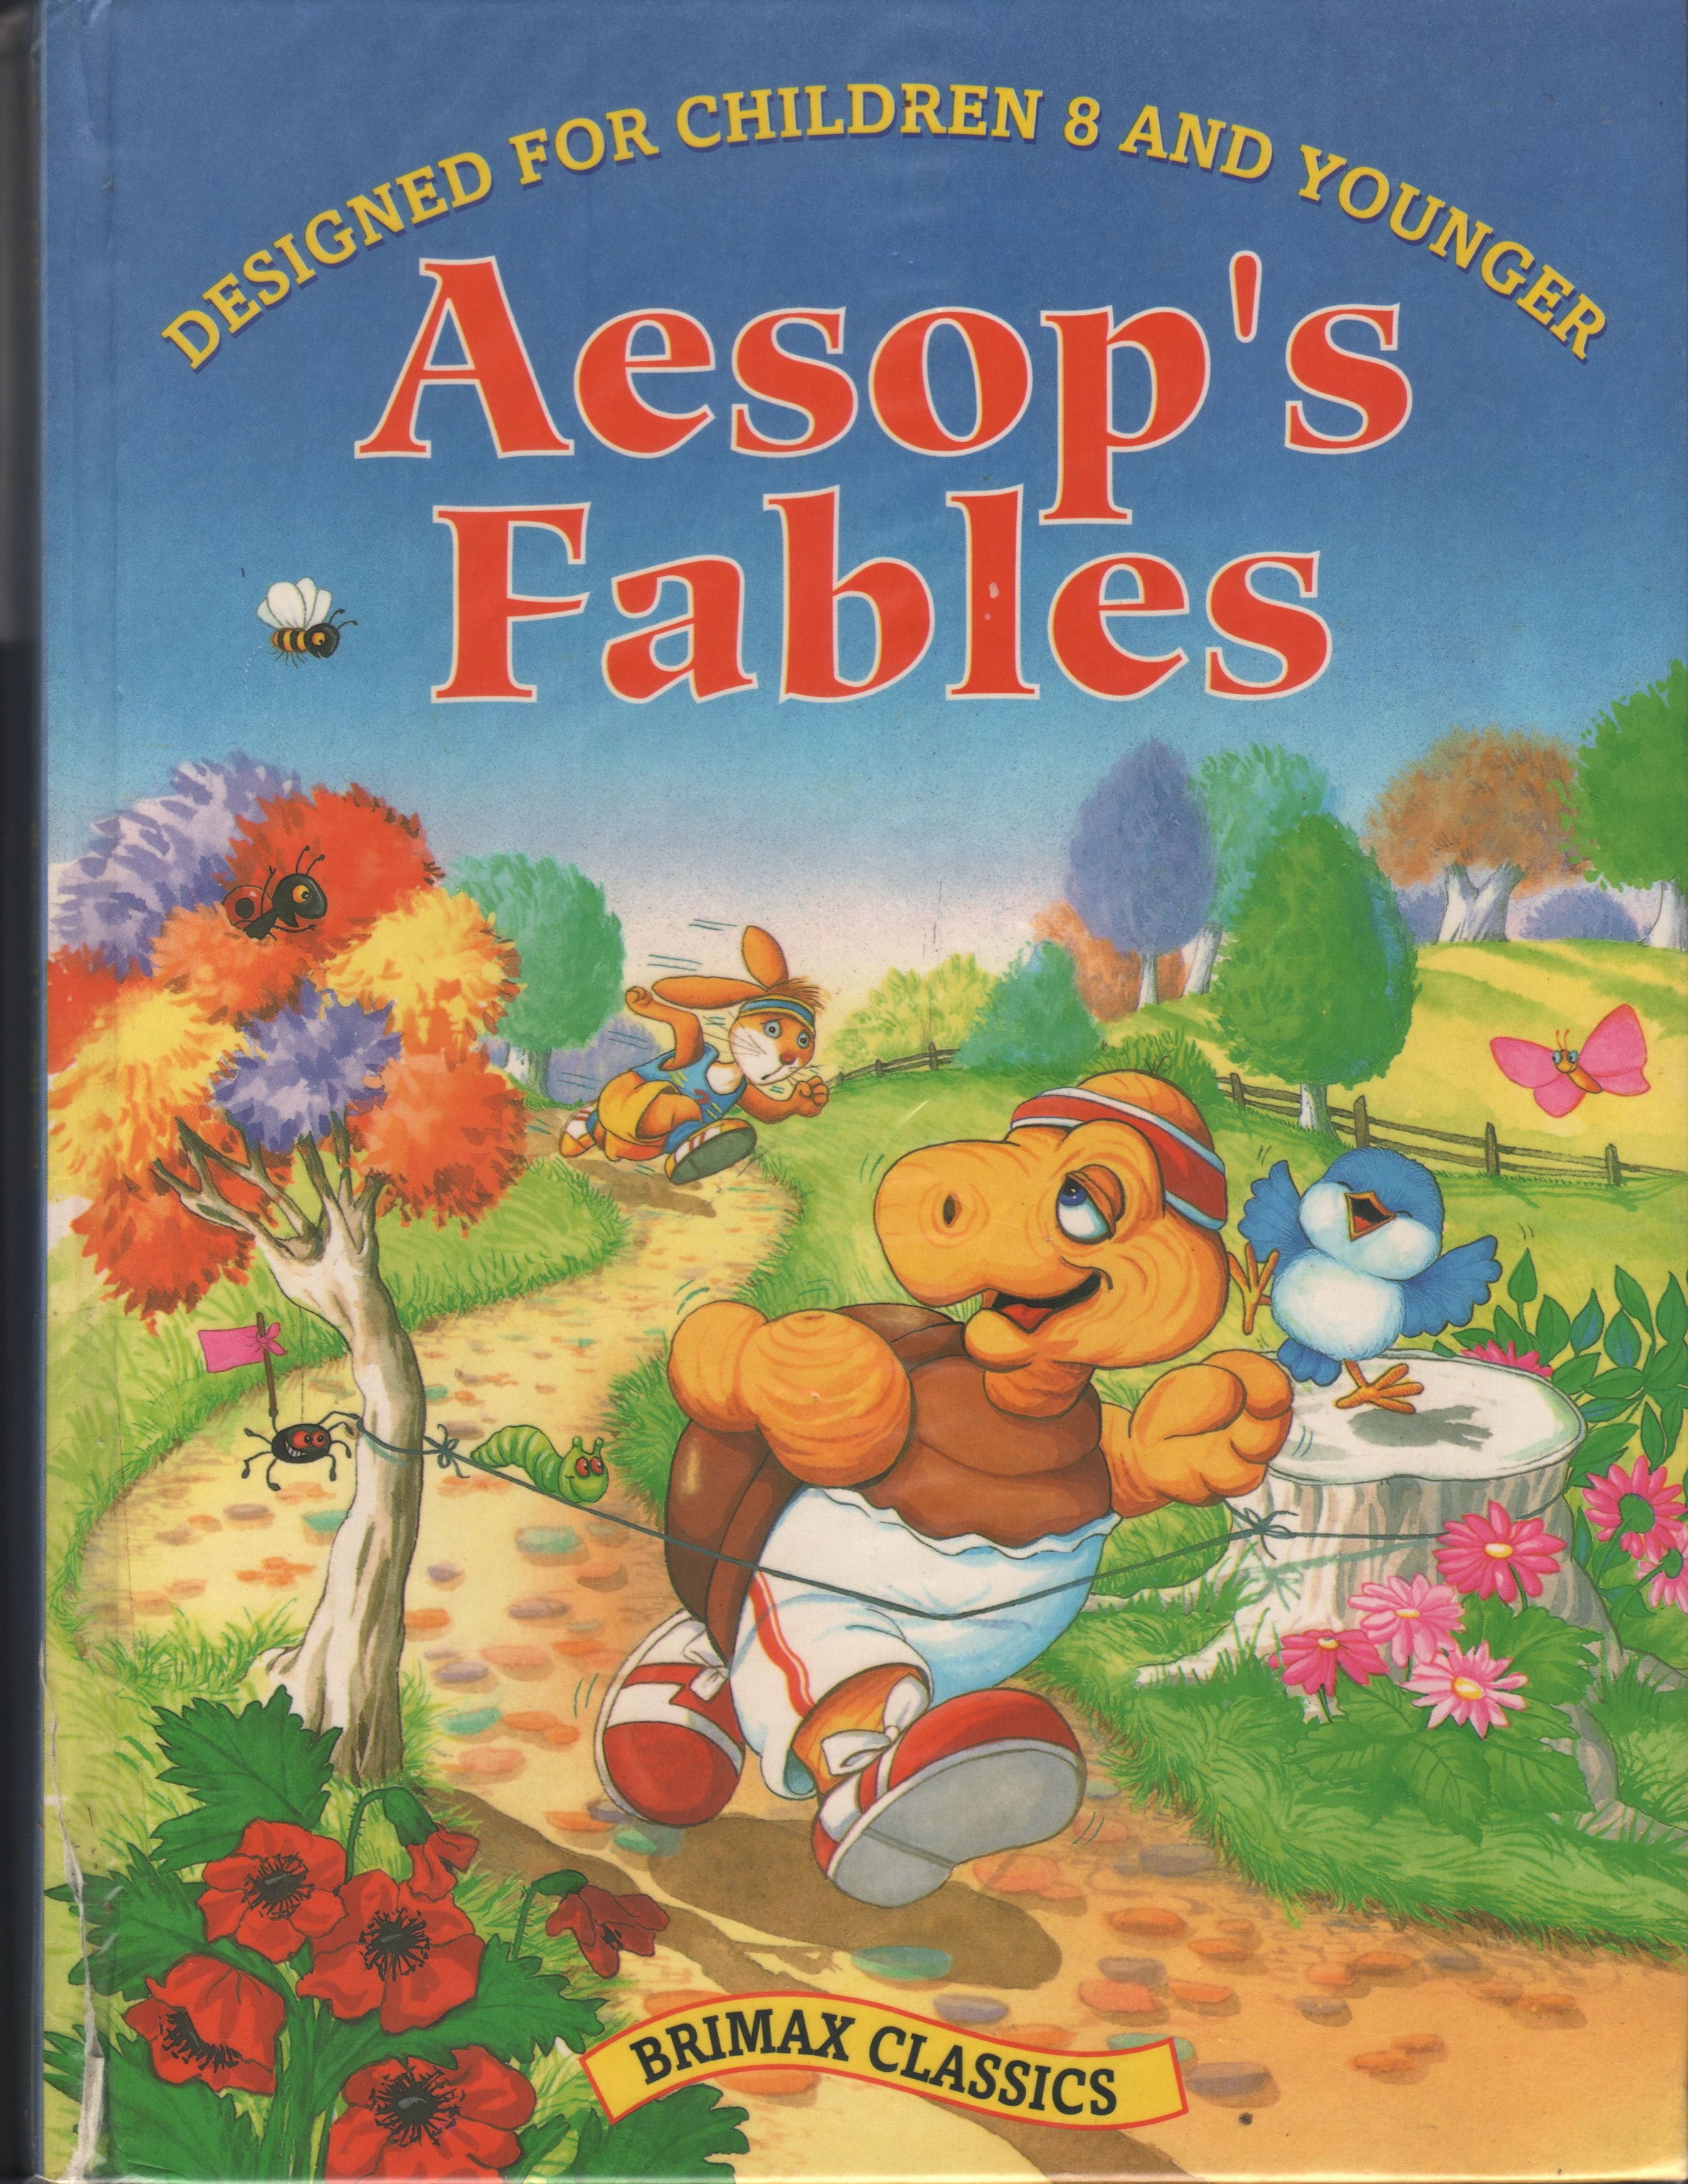 IMG : Aesop's Fables